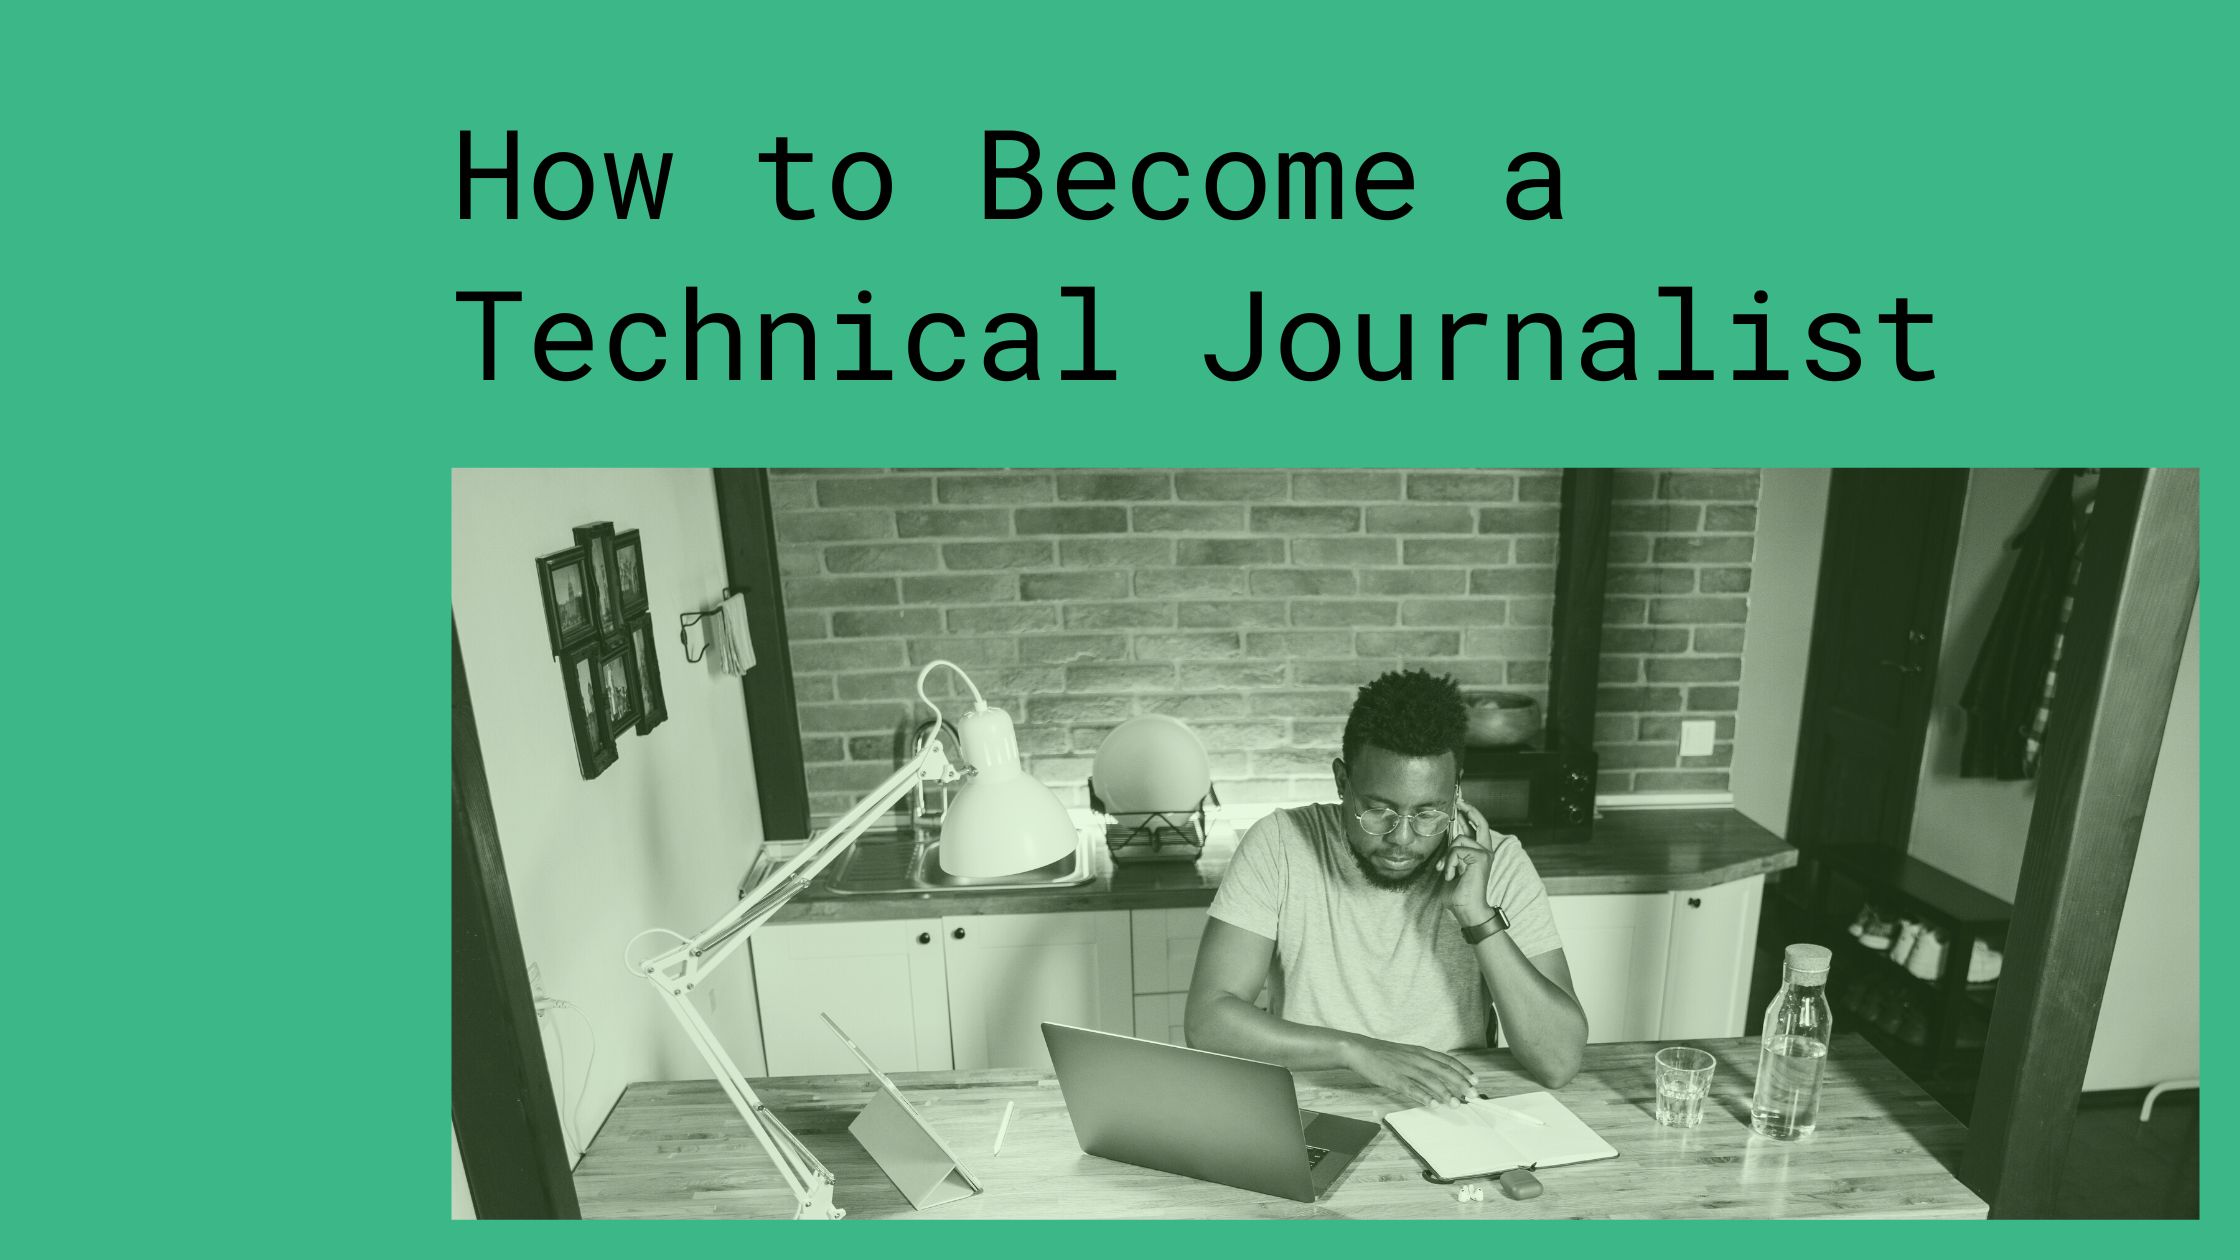 How to Become a Technical Journalist